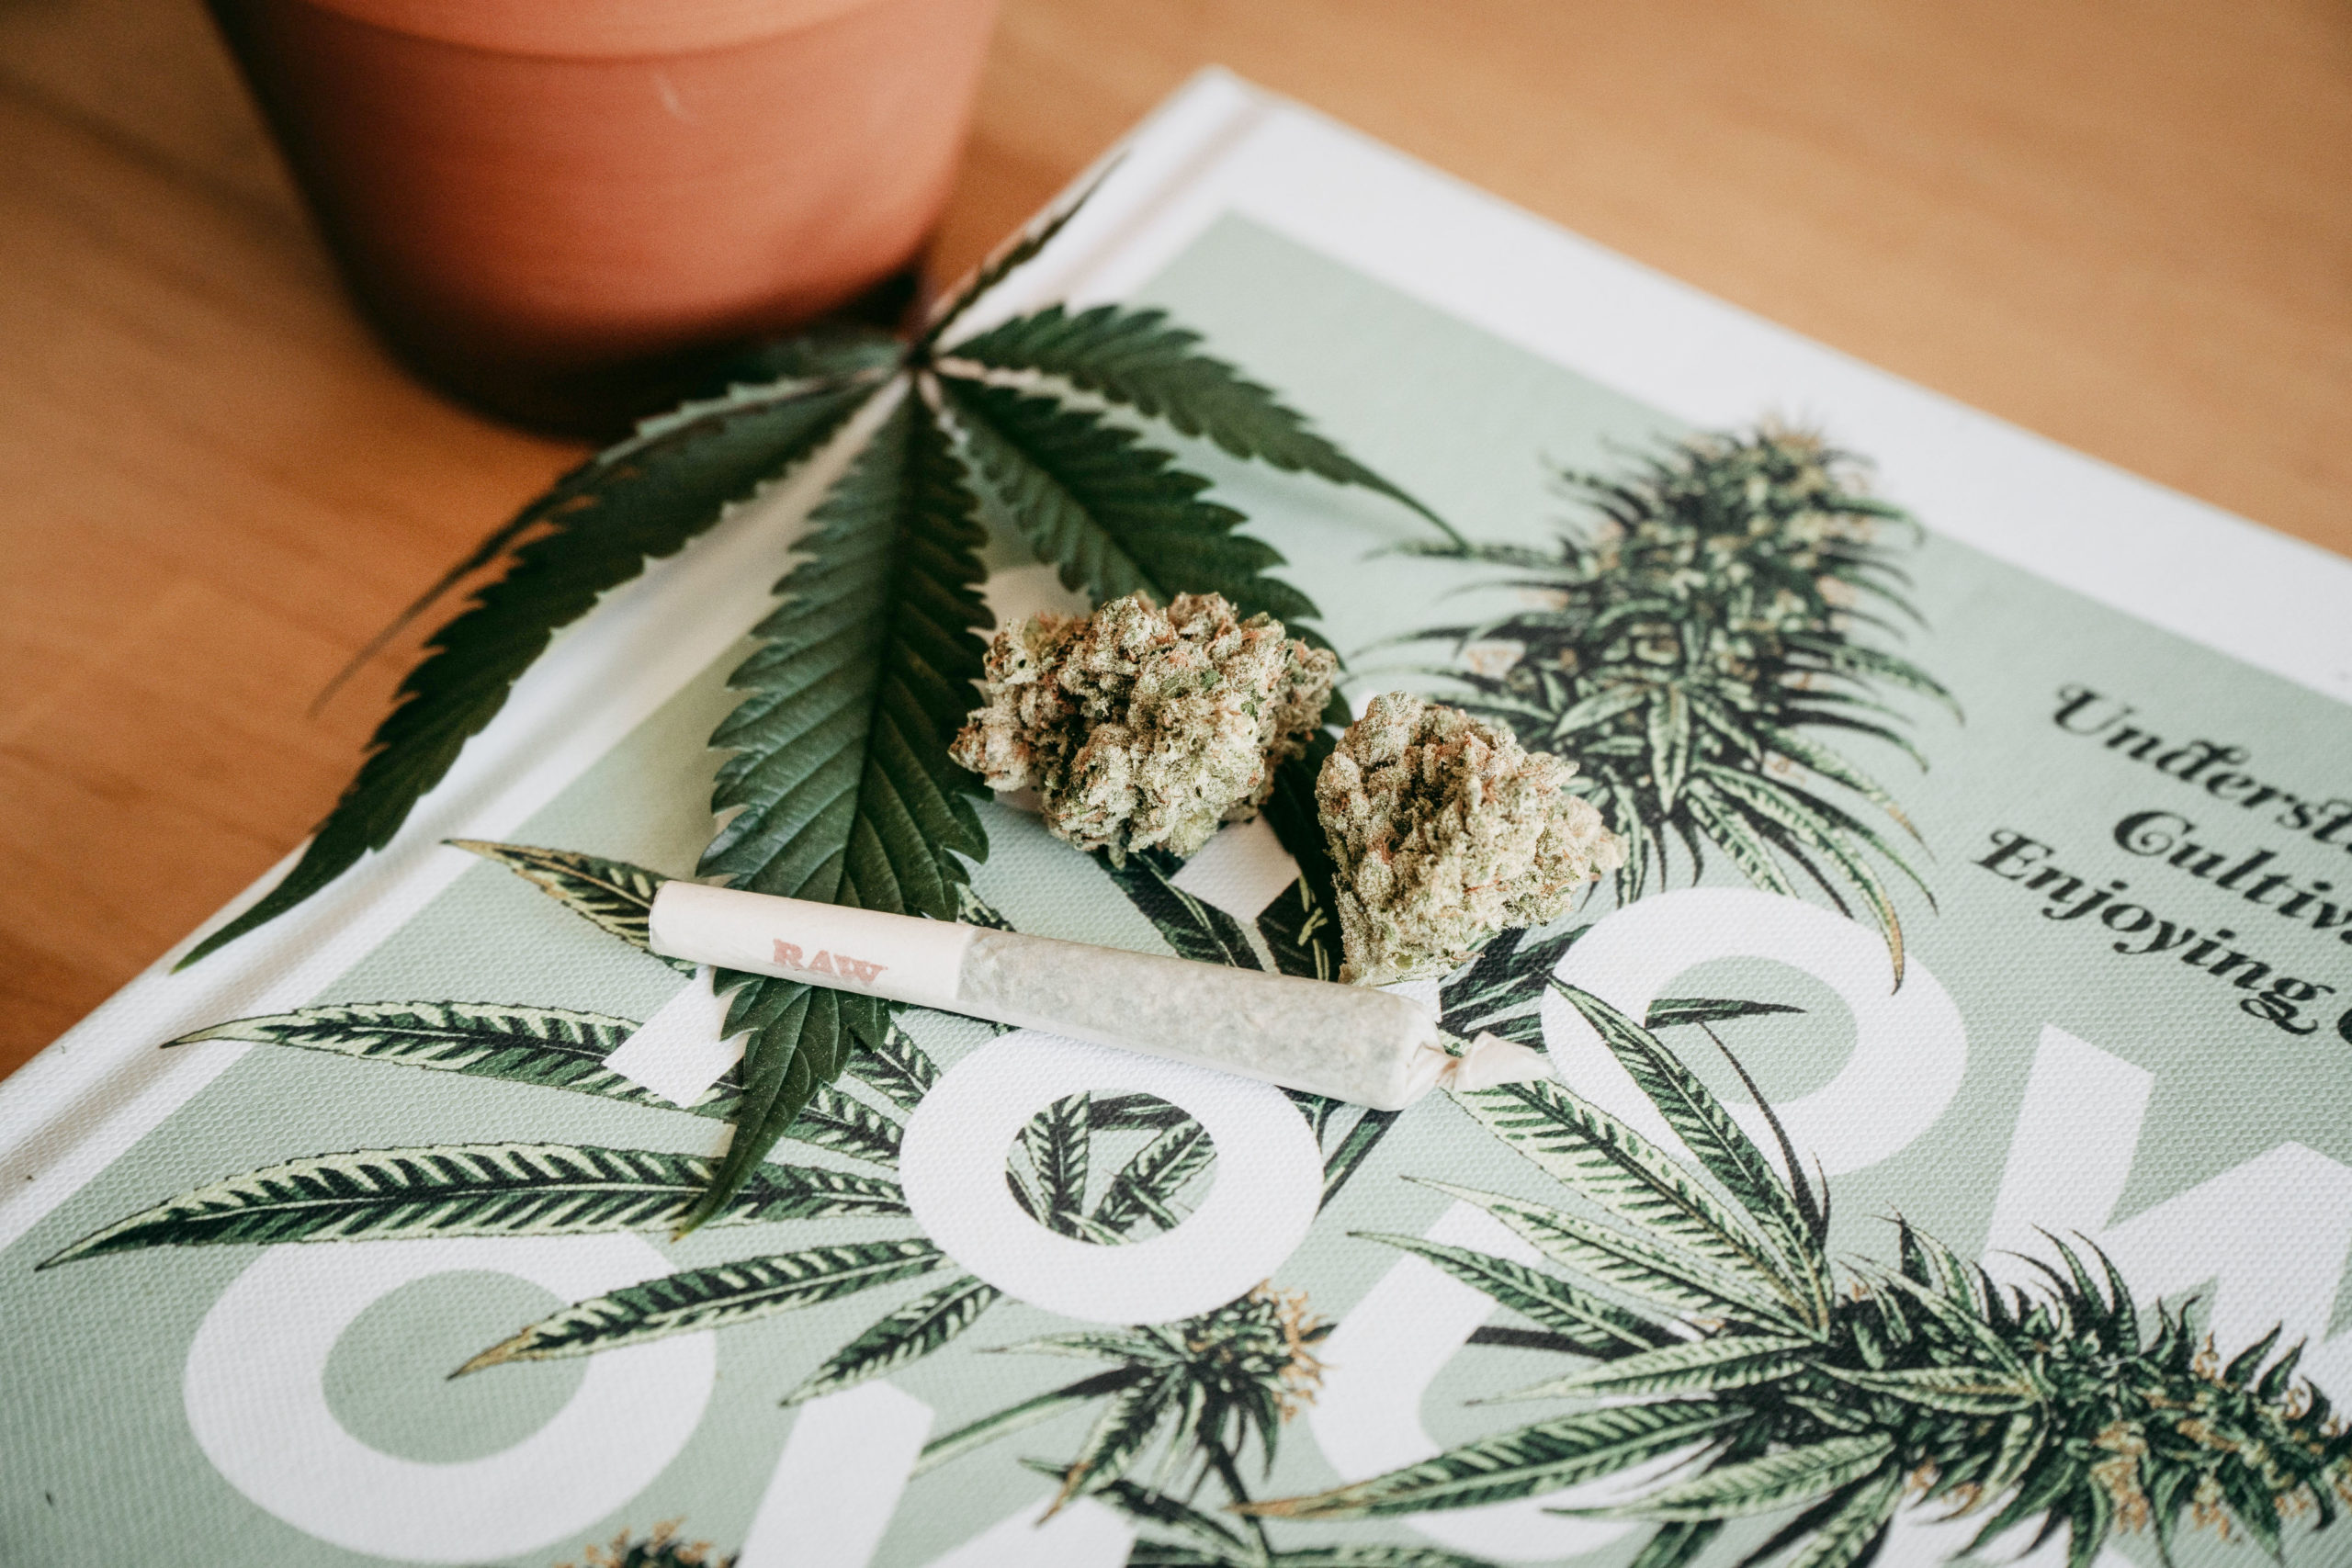 Is Your Wellness or Cannabis Company Ready for PR?